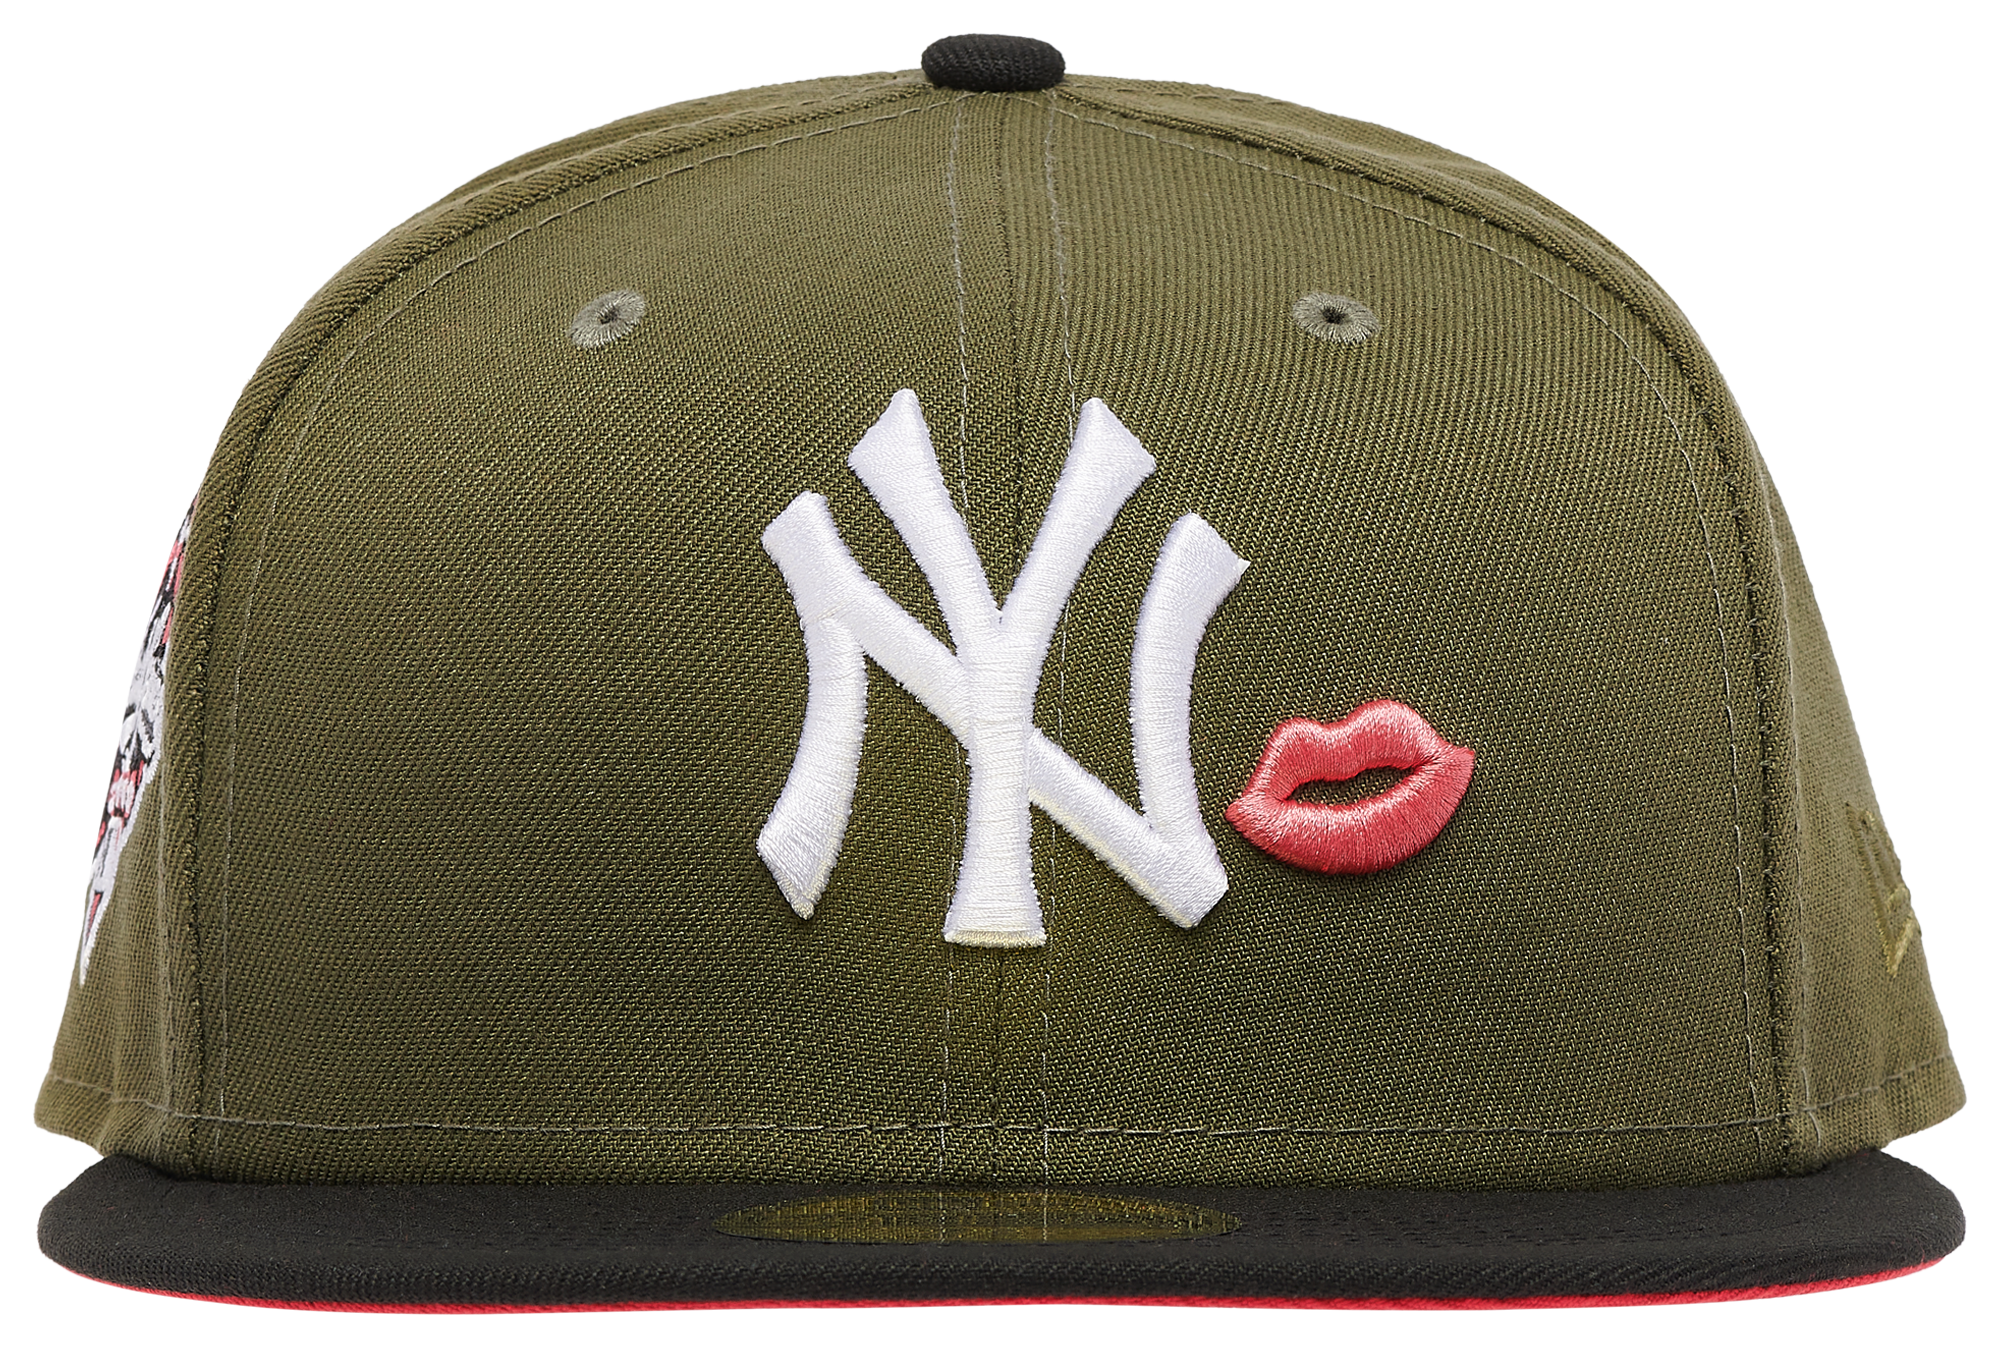 New Era Yankees Side Patch Lips Fitted Cap